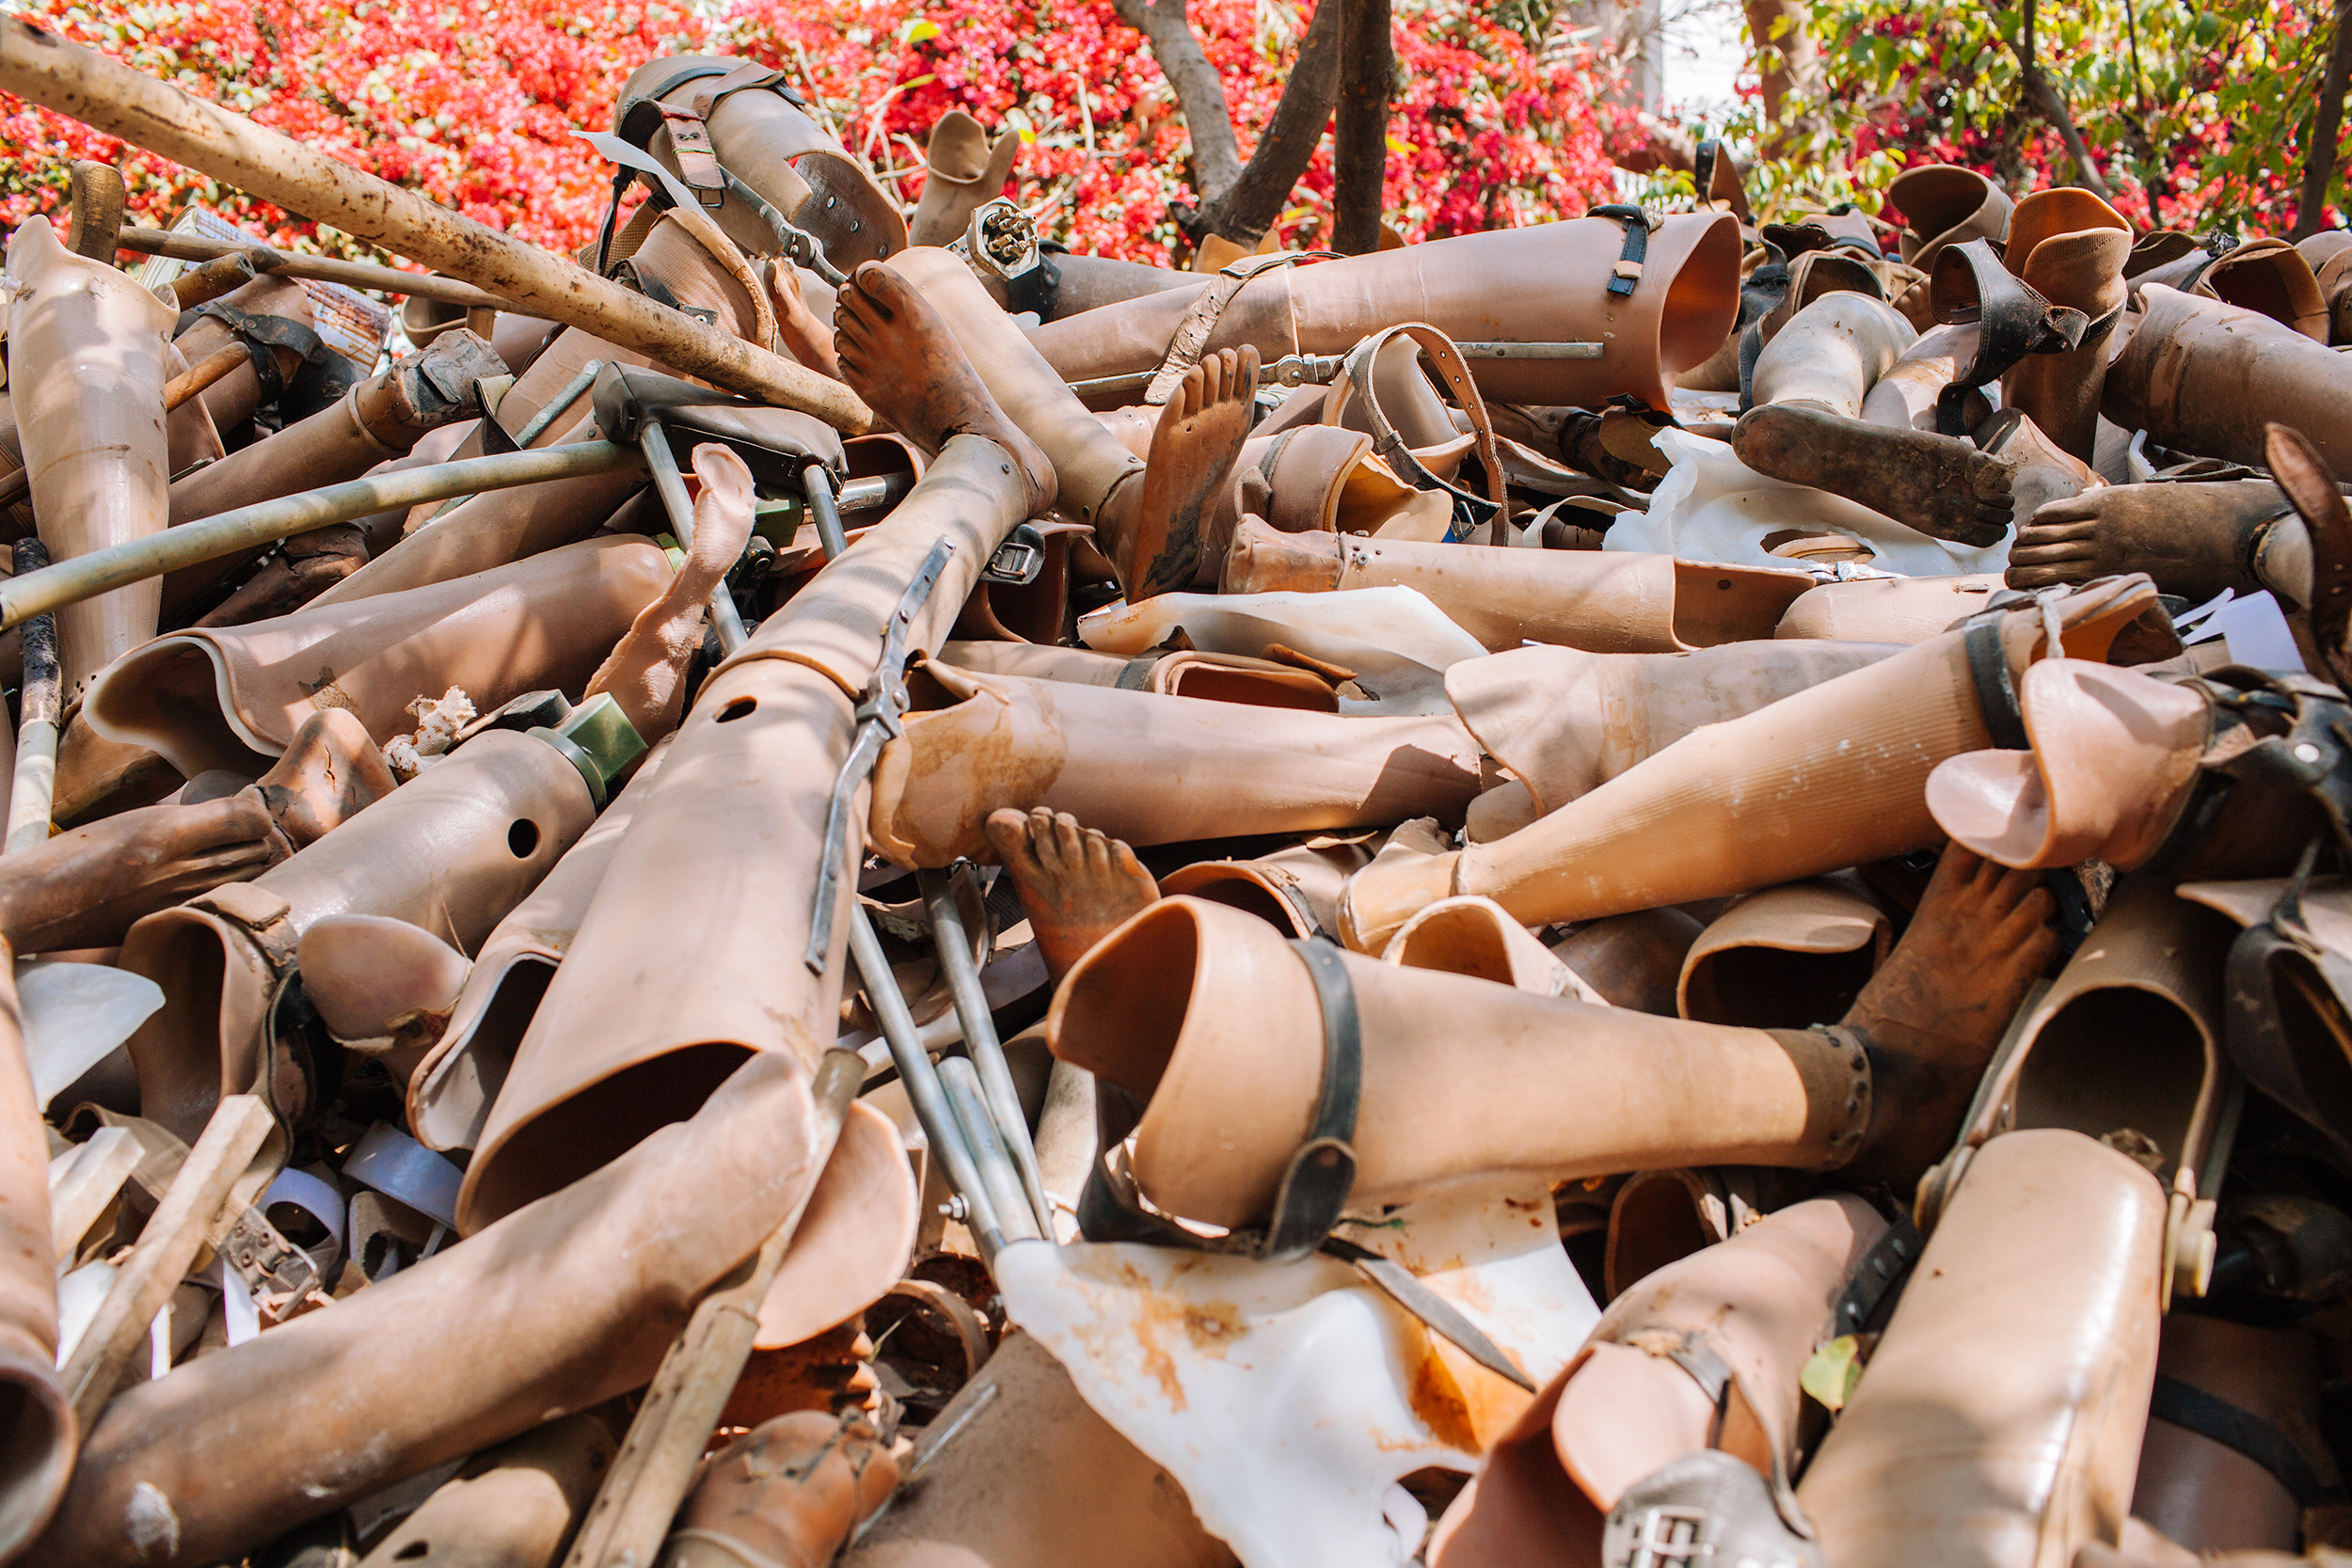  Discarded prosthetic limbs fill the courtyard of Bhagwan Mahaveer Viklang Sahayata Samiti (BMVSS), also known as Jaipur Foot. BMVSS is an organization based in Jaipur, India, specializing in low-cost artificial limbs. 